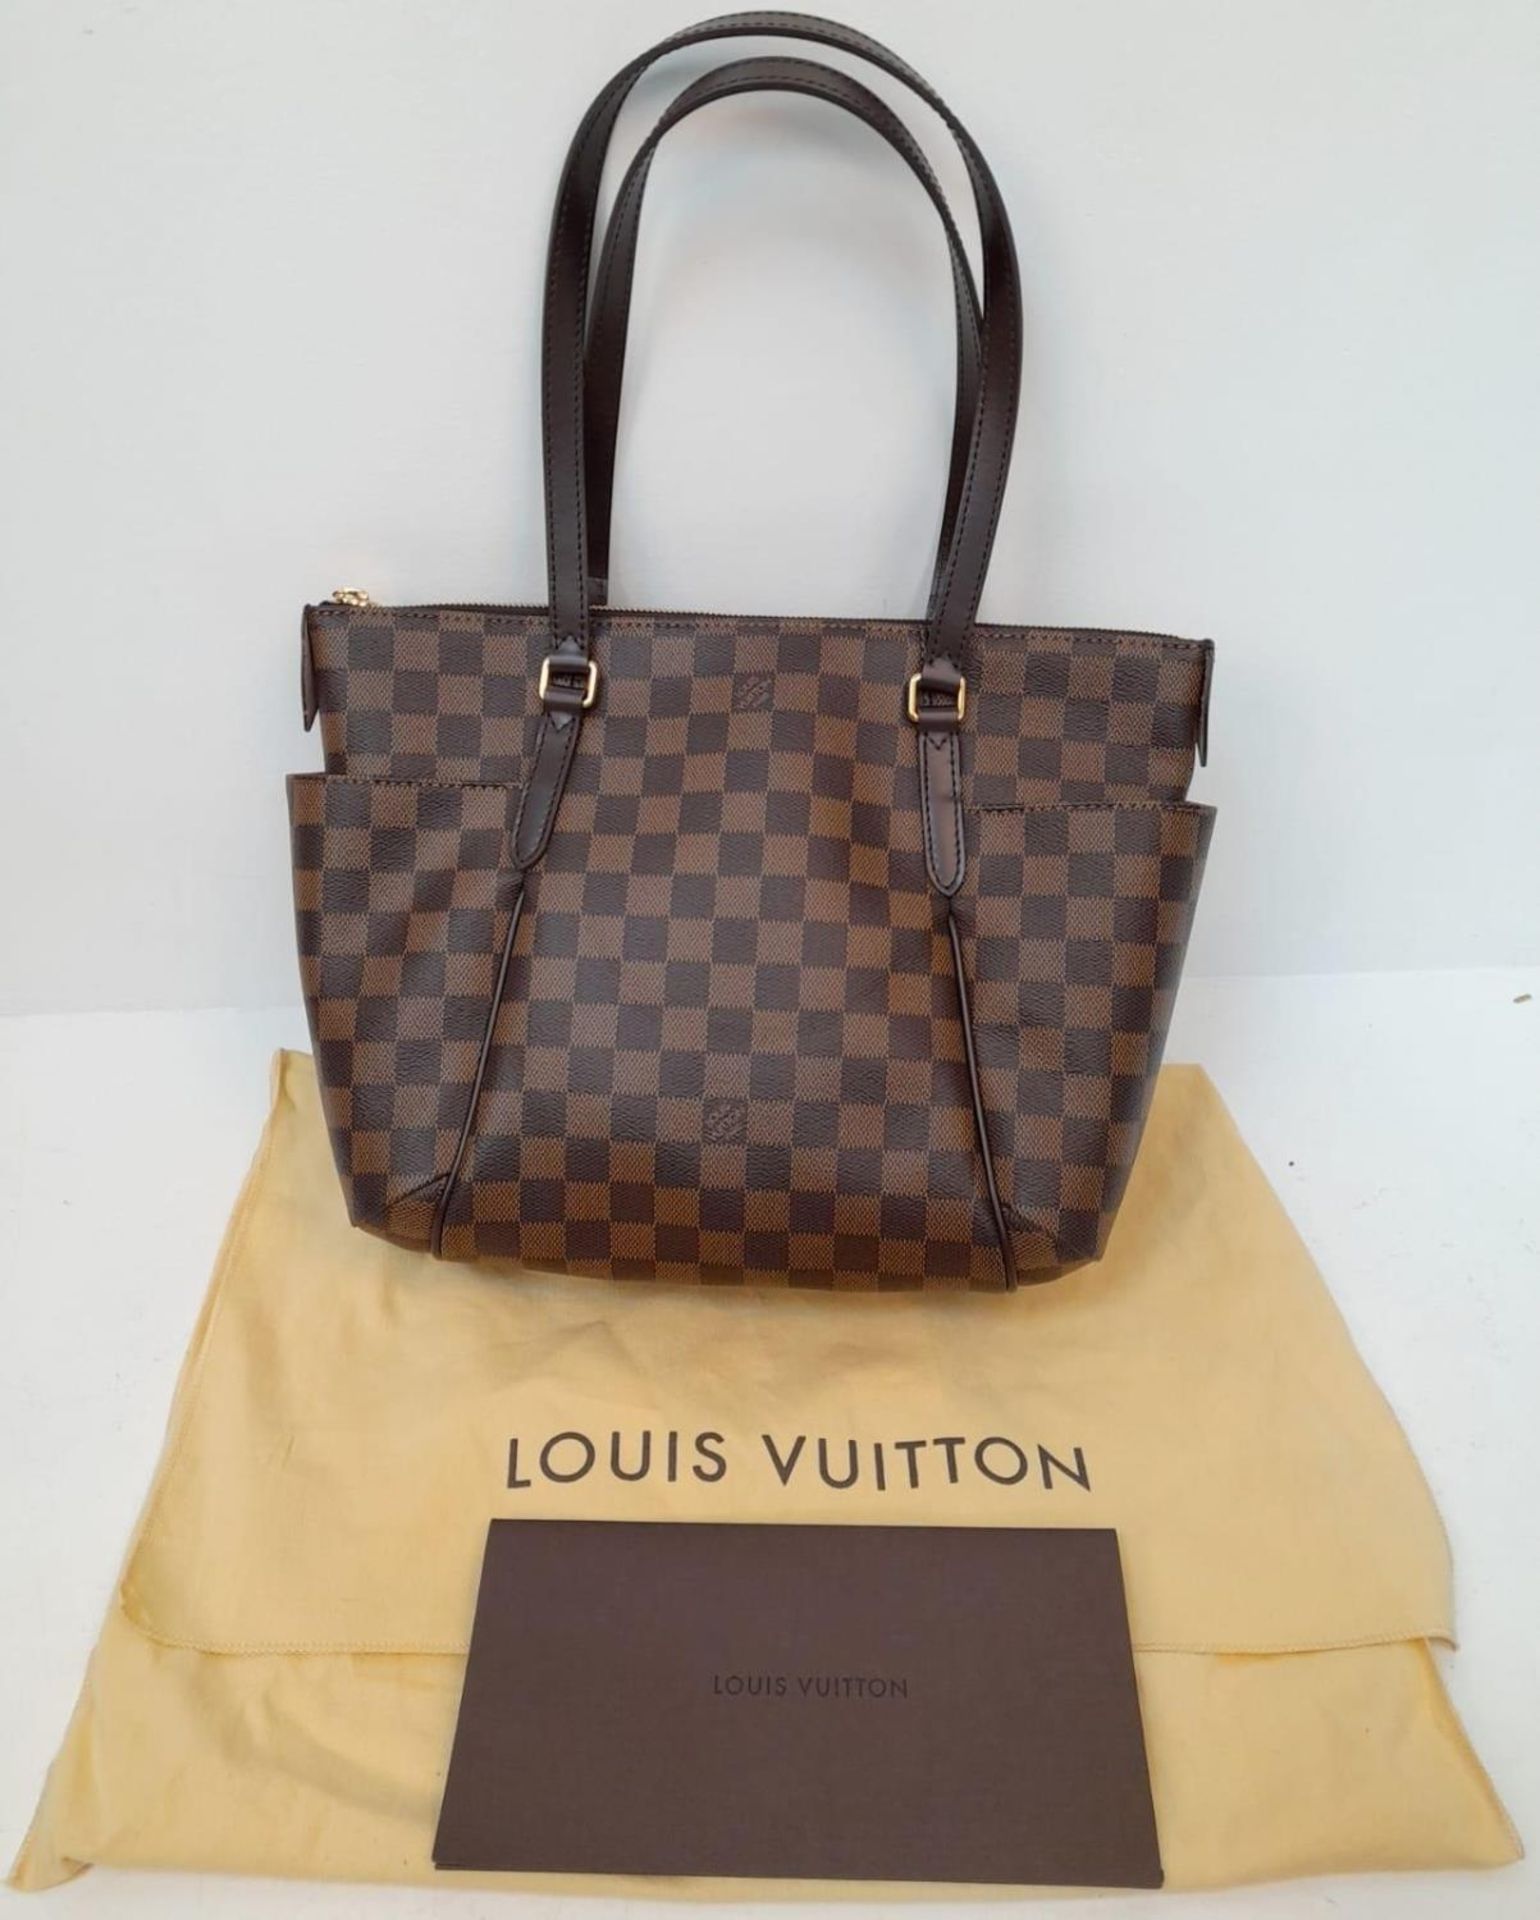 A Louis Vuitton Damier Ebene 'Totally PM' Shoulder Bag. Canvas exterior with gold-toned hardware, - Image 4 of 4